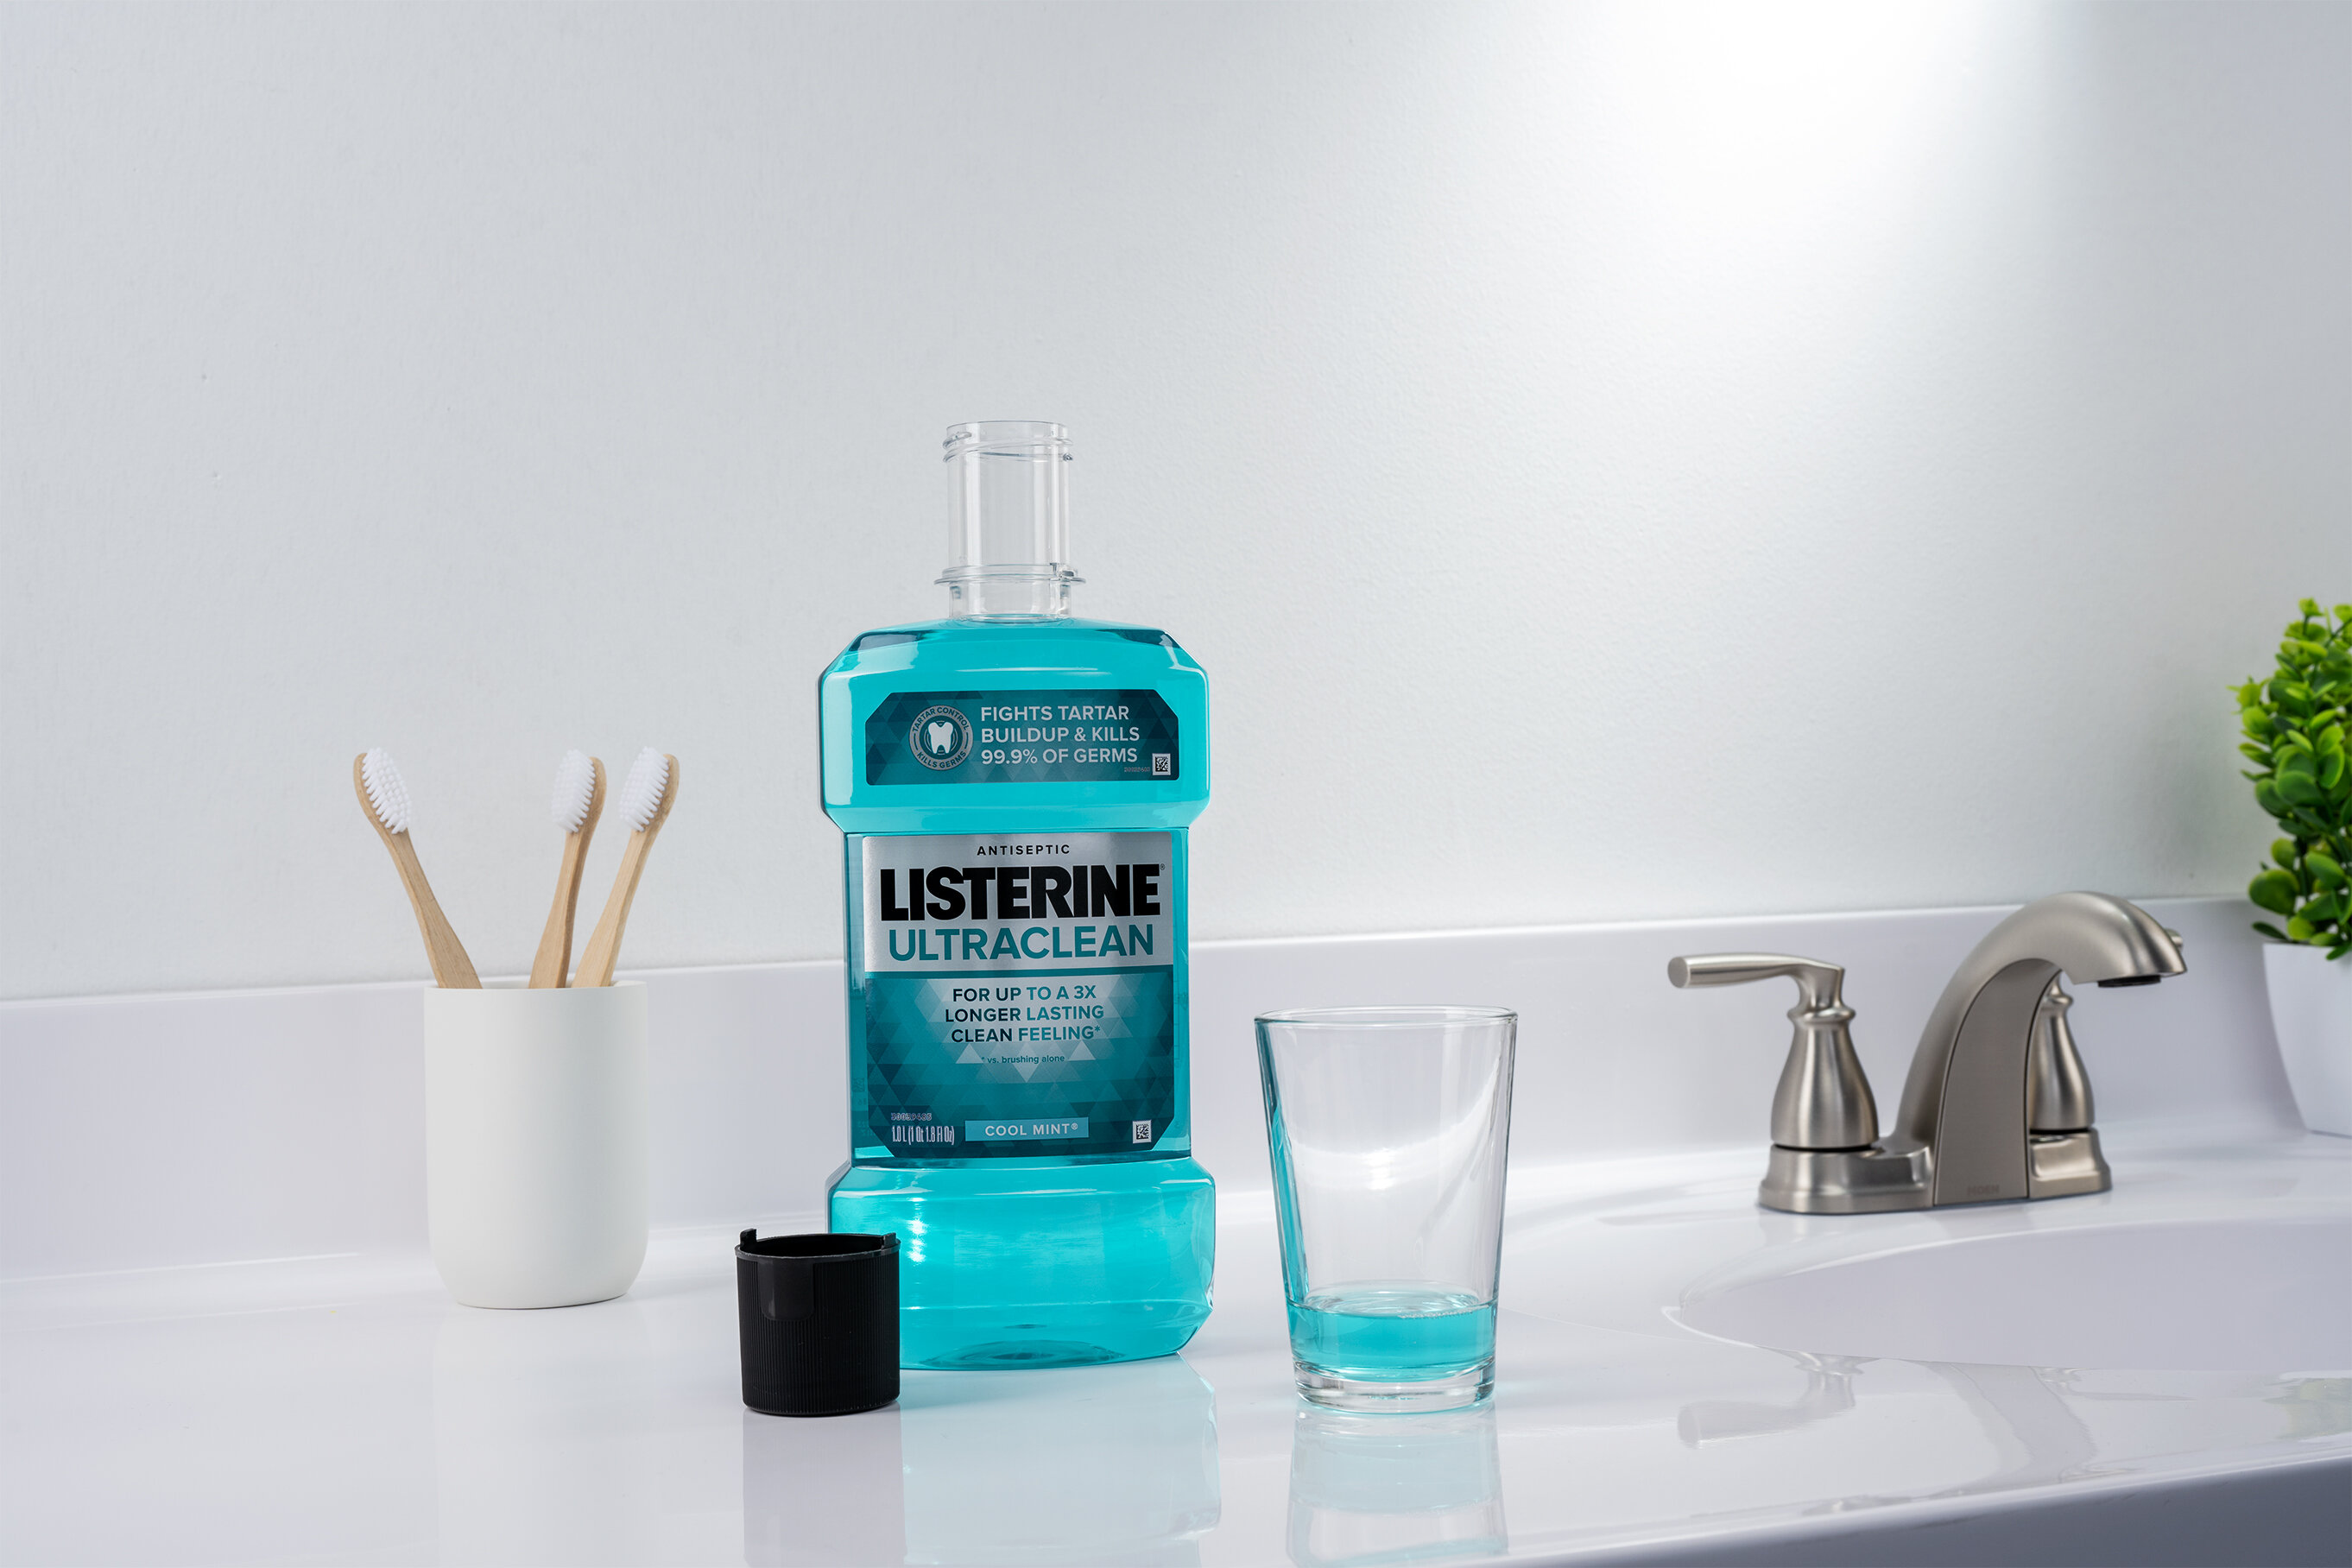 Listerine Ultraclean mouthwash with a cup in a sink